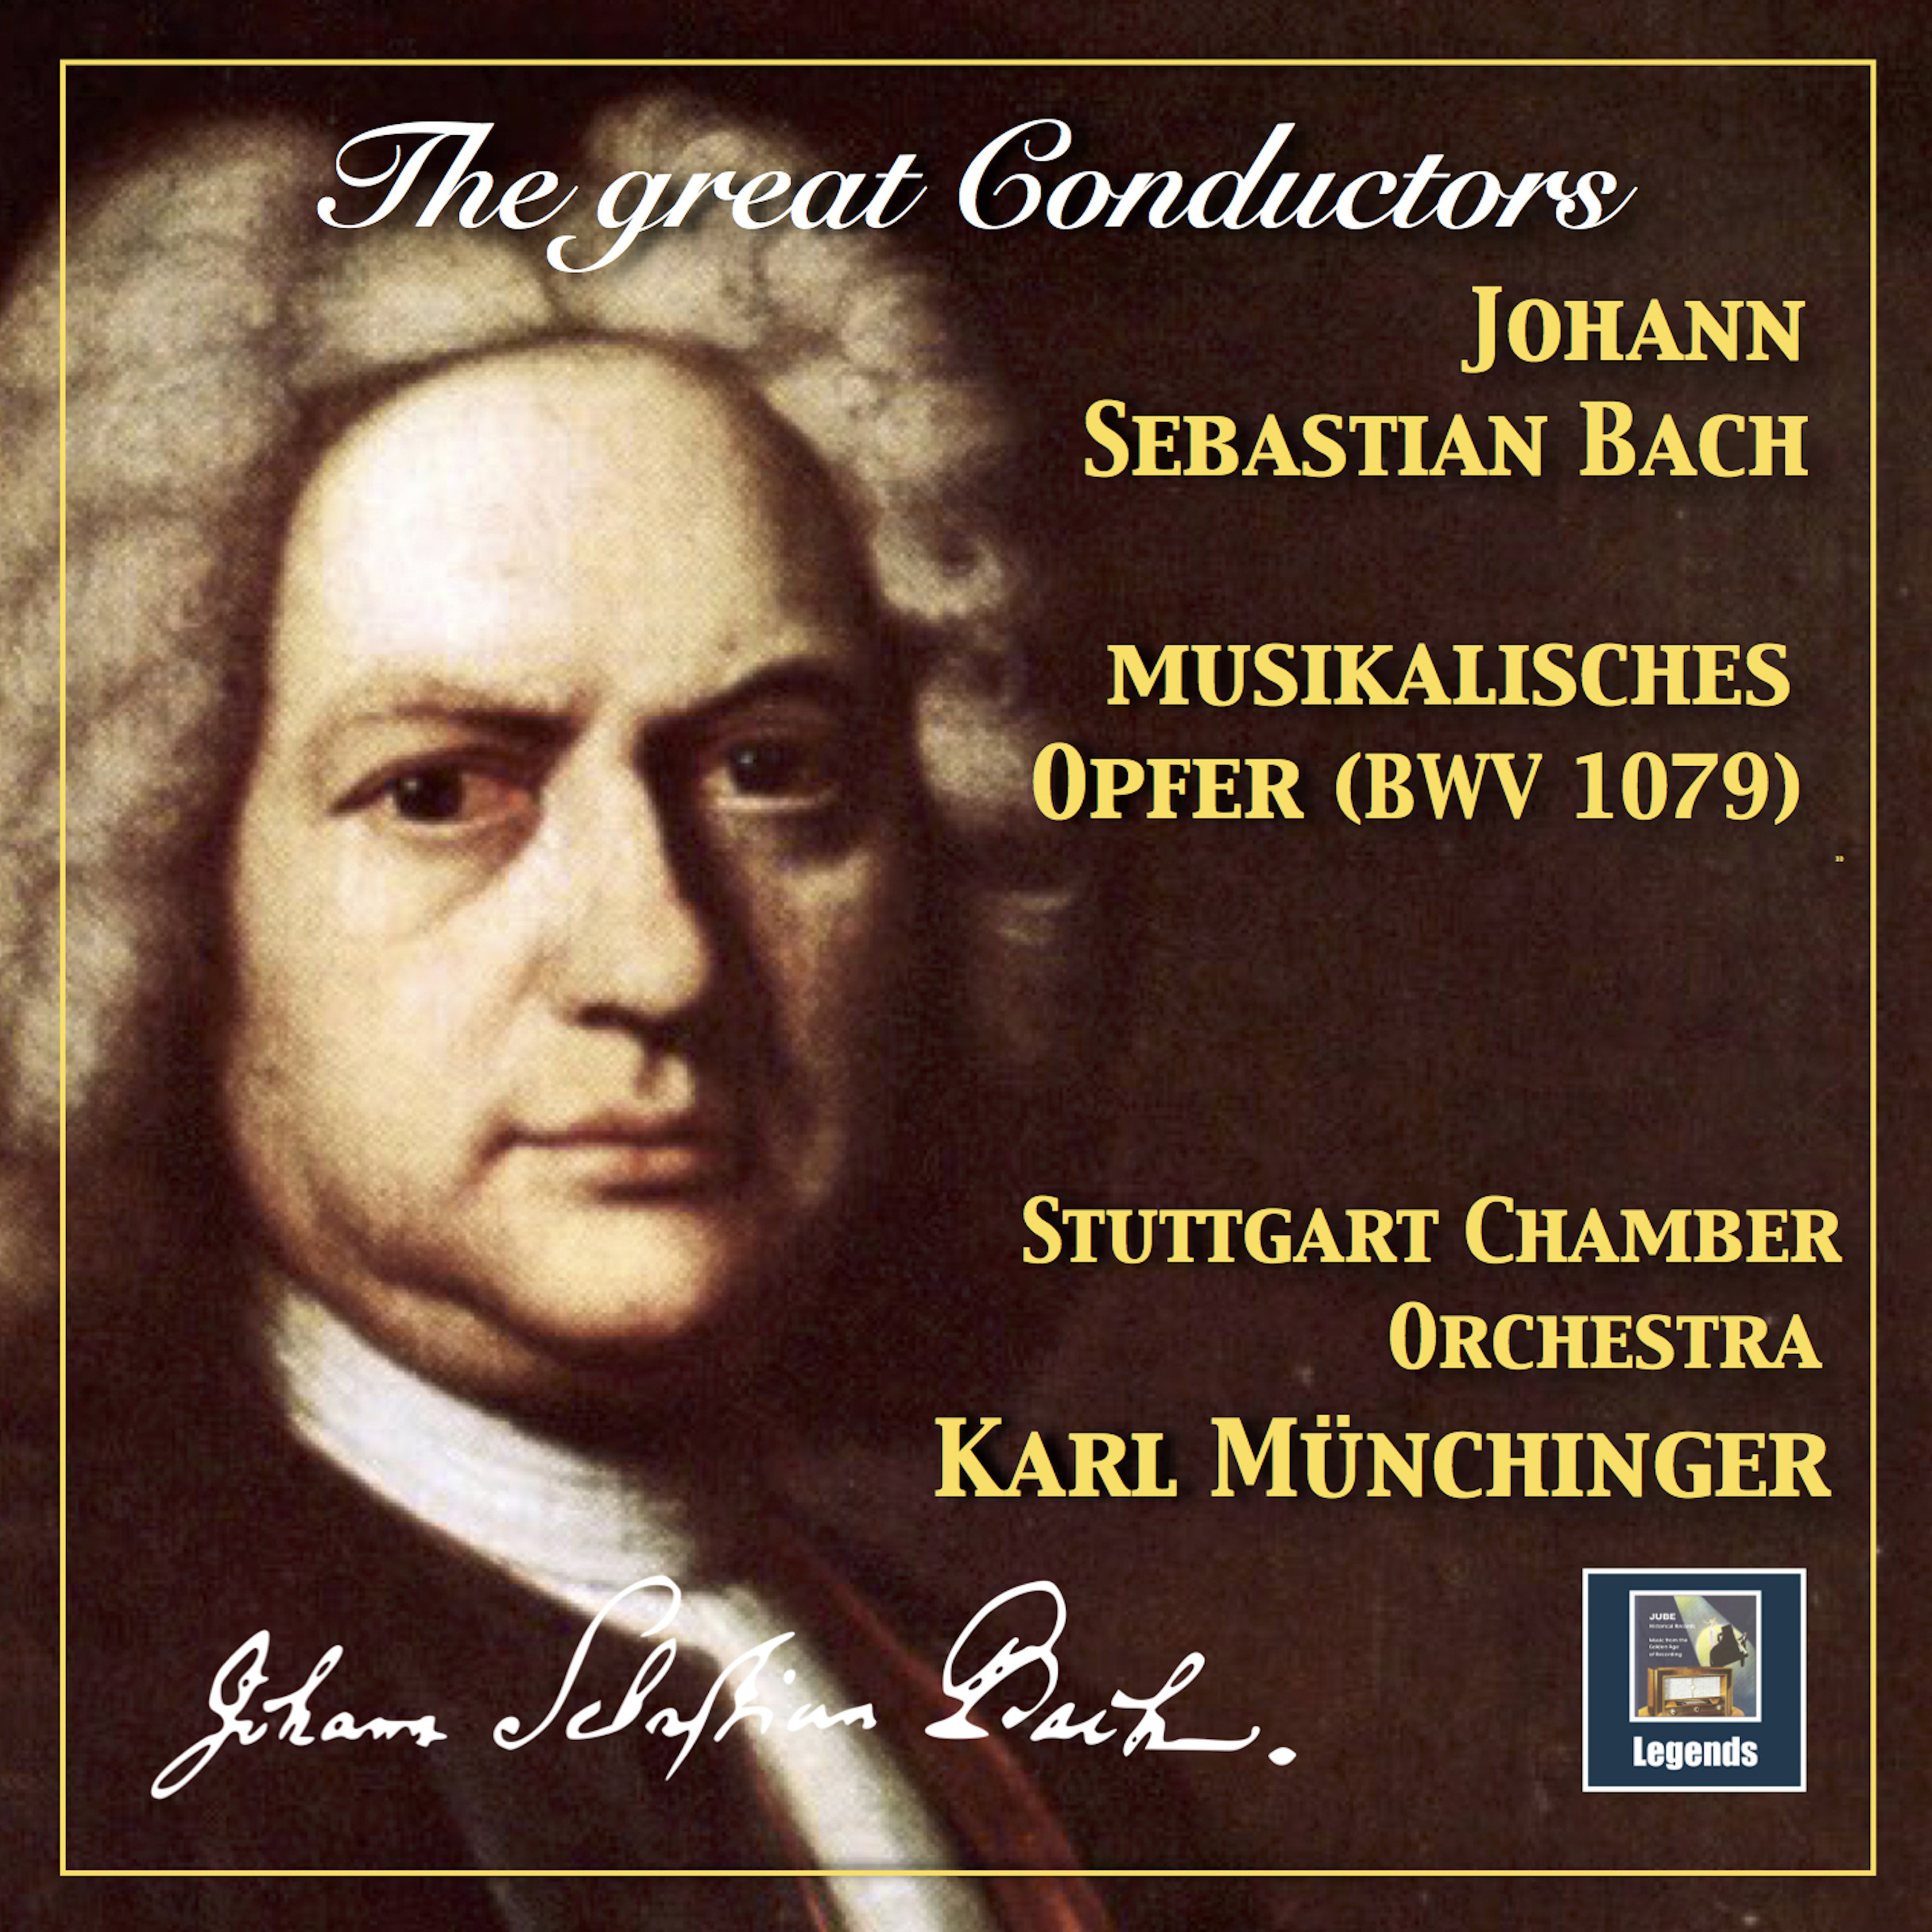 Musikalisches Opfer, BWV 1079 Arr. K. Mü nchinger for Chamber Orchestra: Ricercare a 6